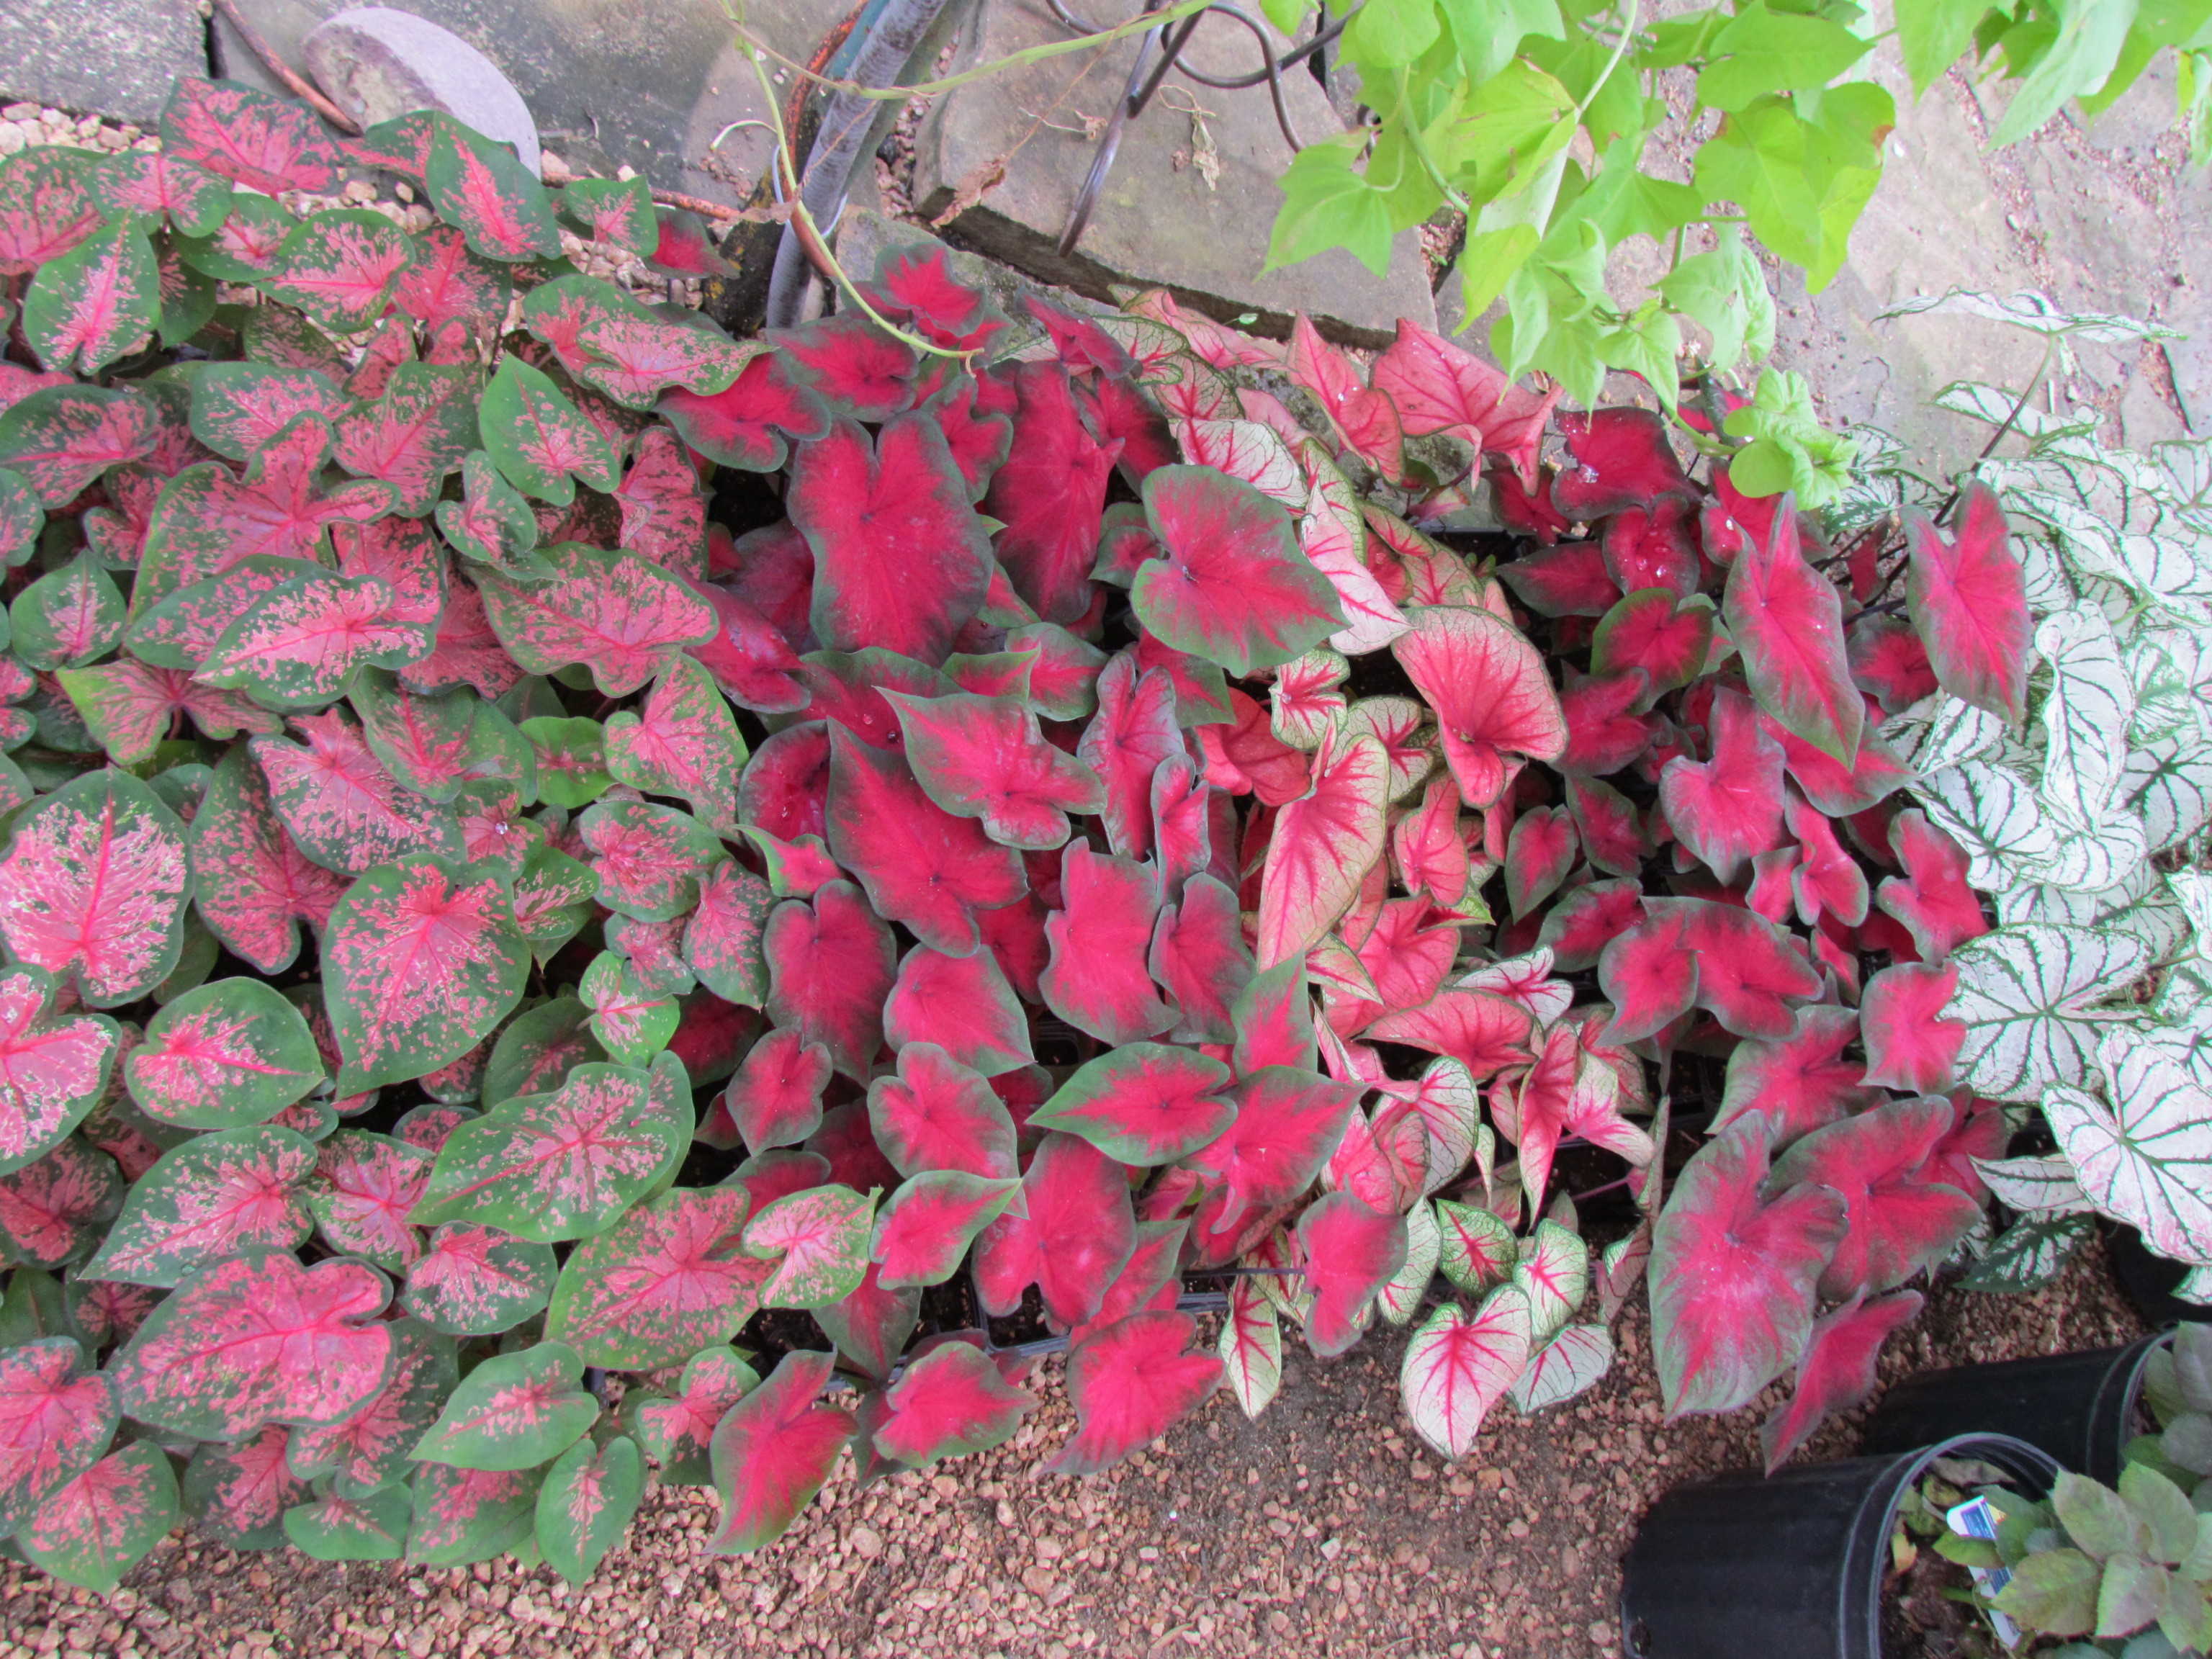 Groundcover like Caladiums and more available Madison Gardens Nursery, Spring, TX